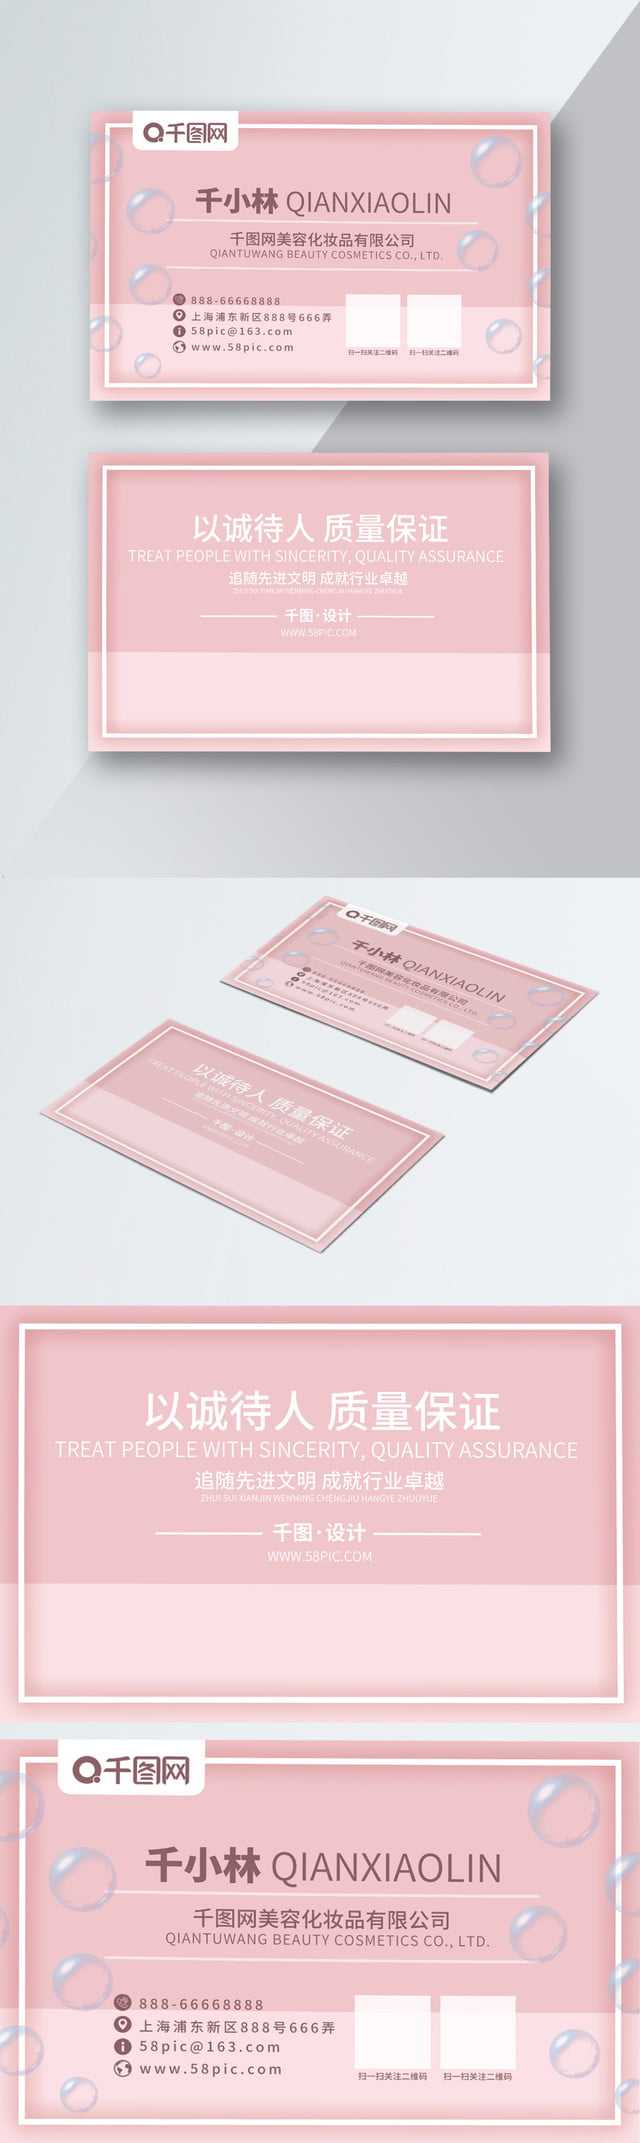 Mary Kay Business Card Free Download Cdr Background Creative With Regard To Mary Kay Business Cards Templates Free